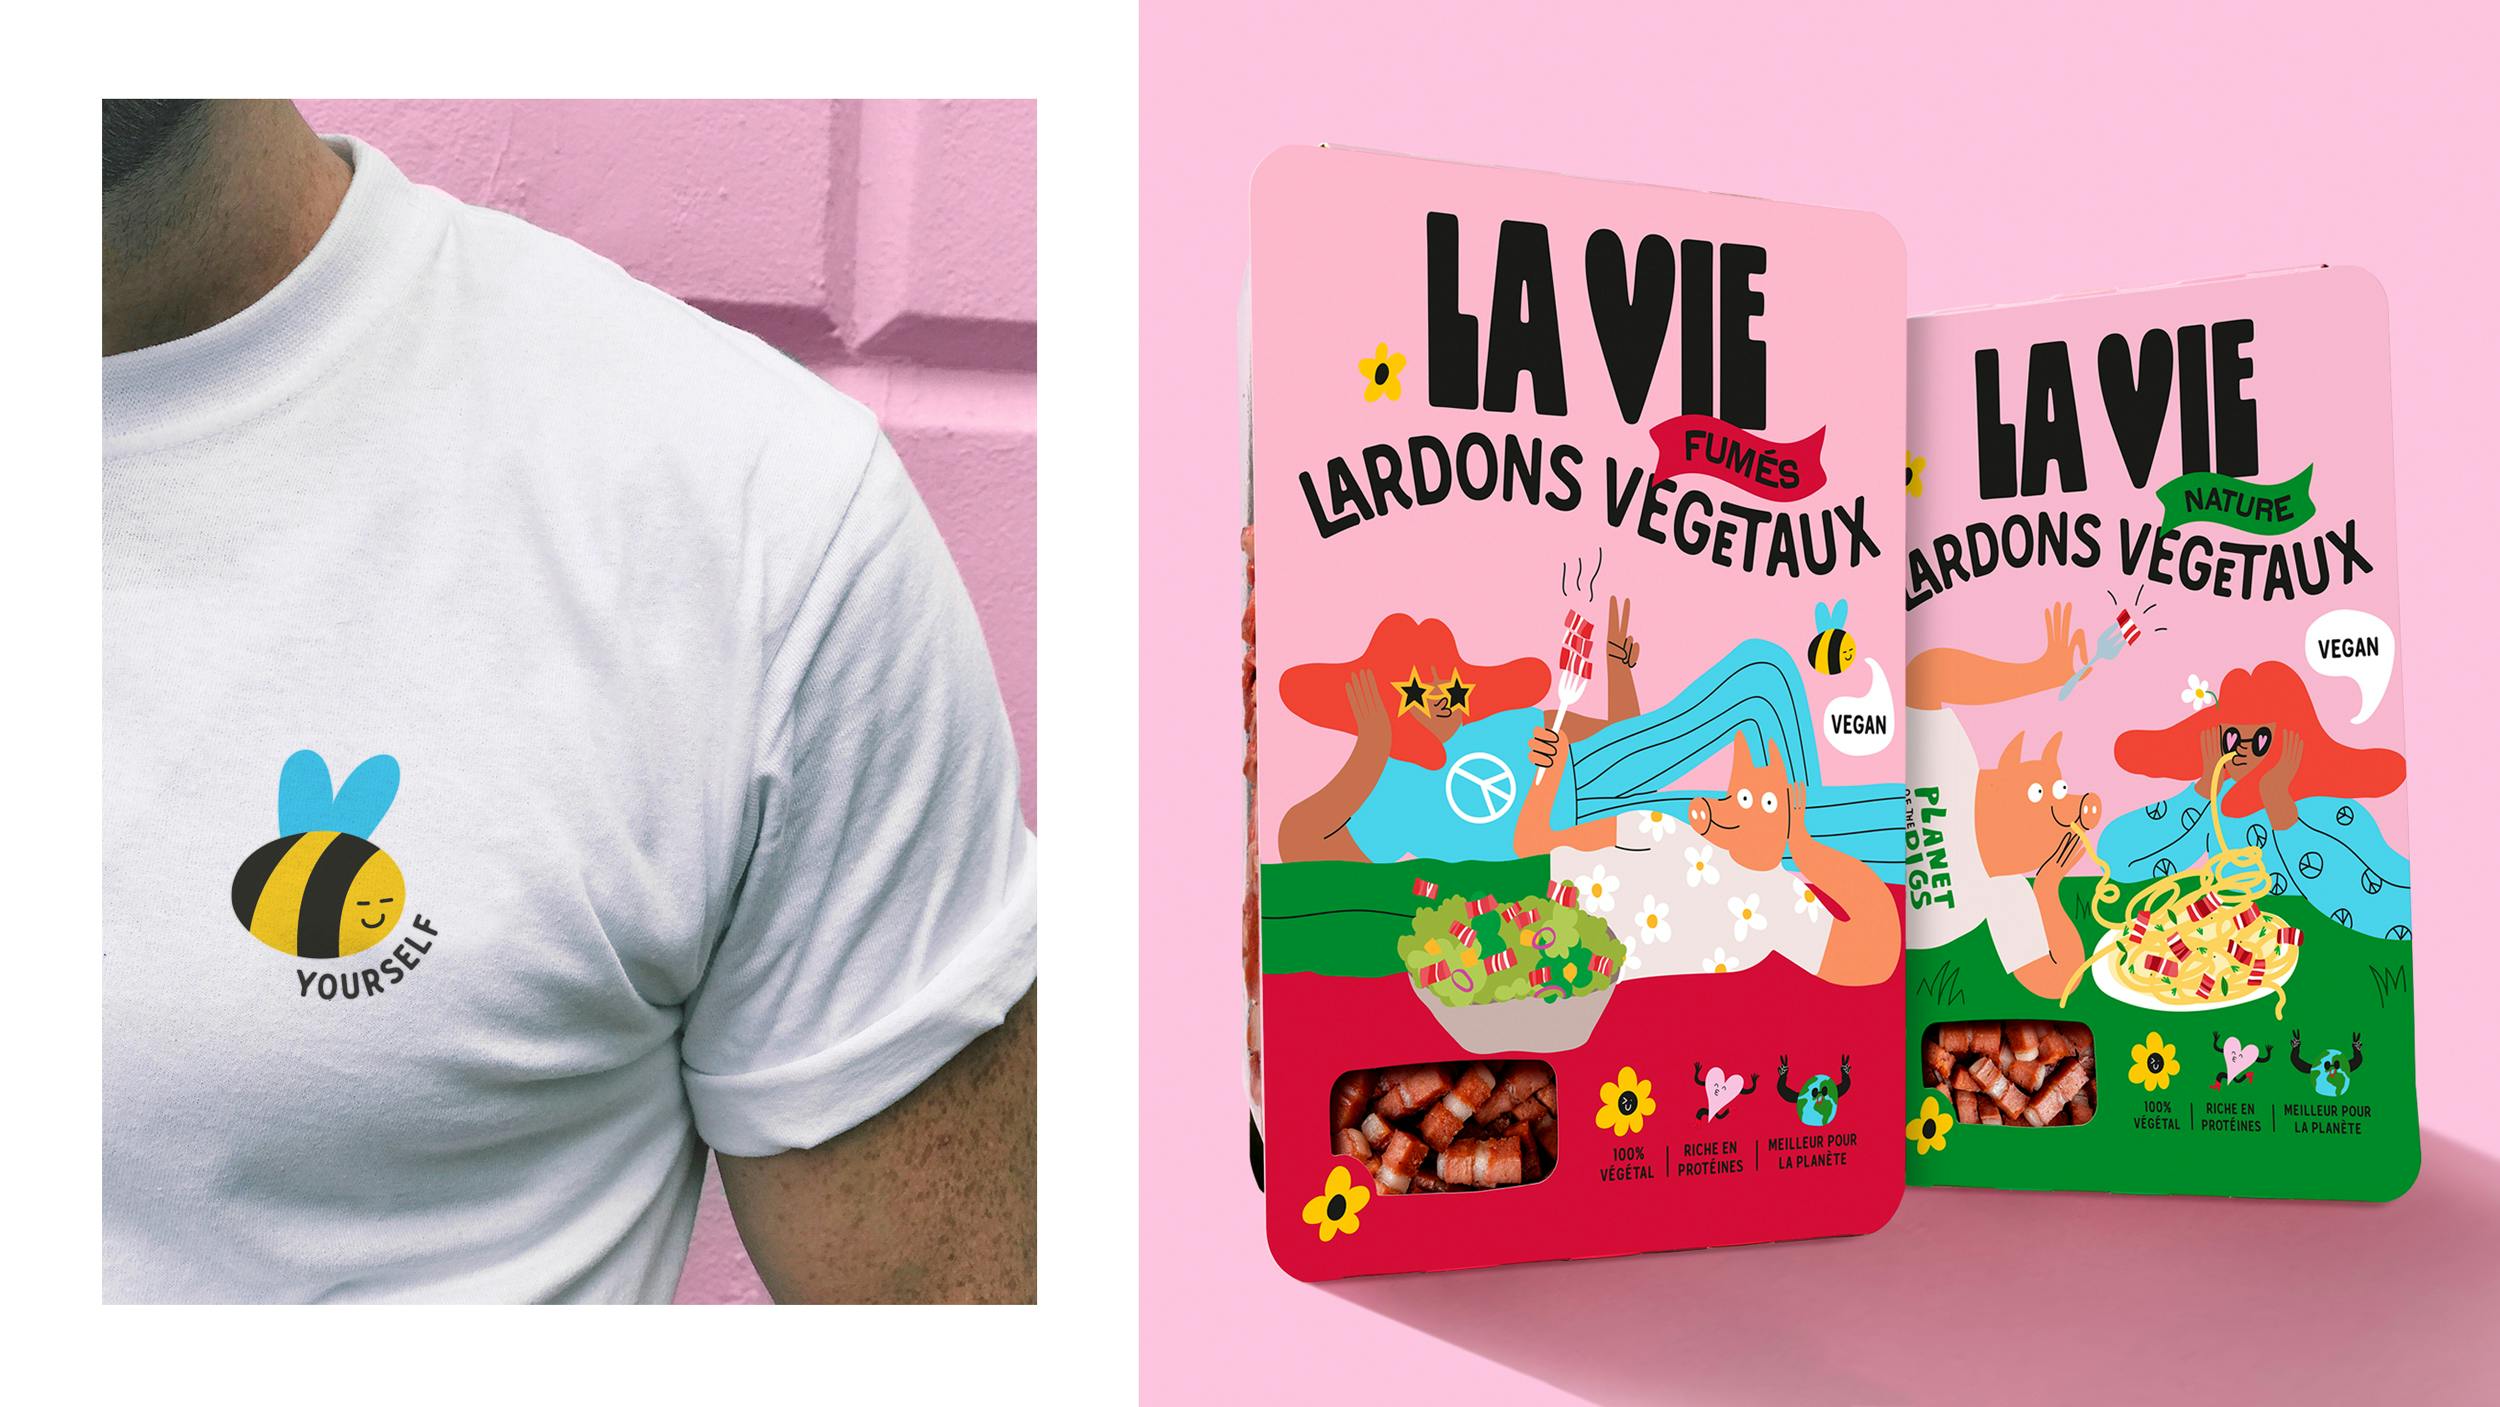 La Vie tee shirt and package